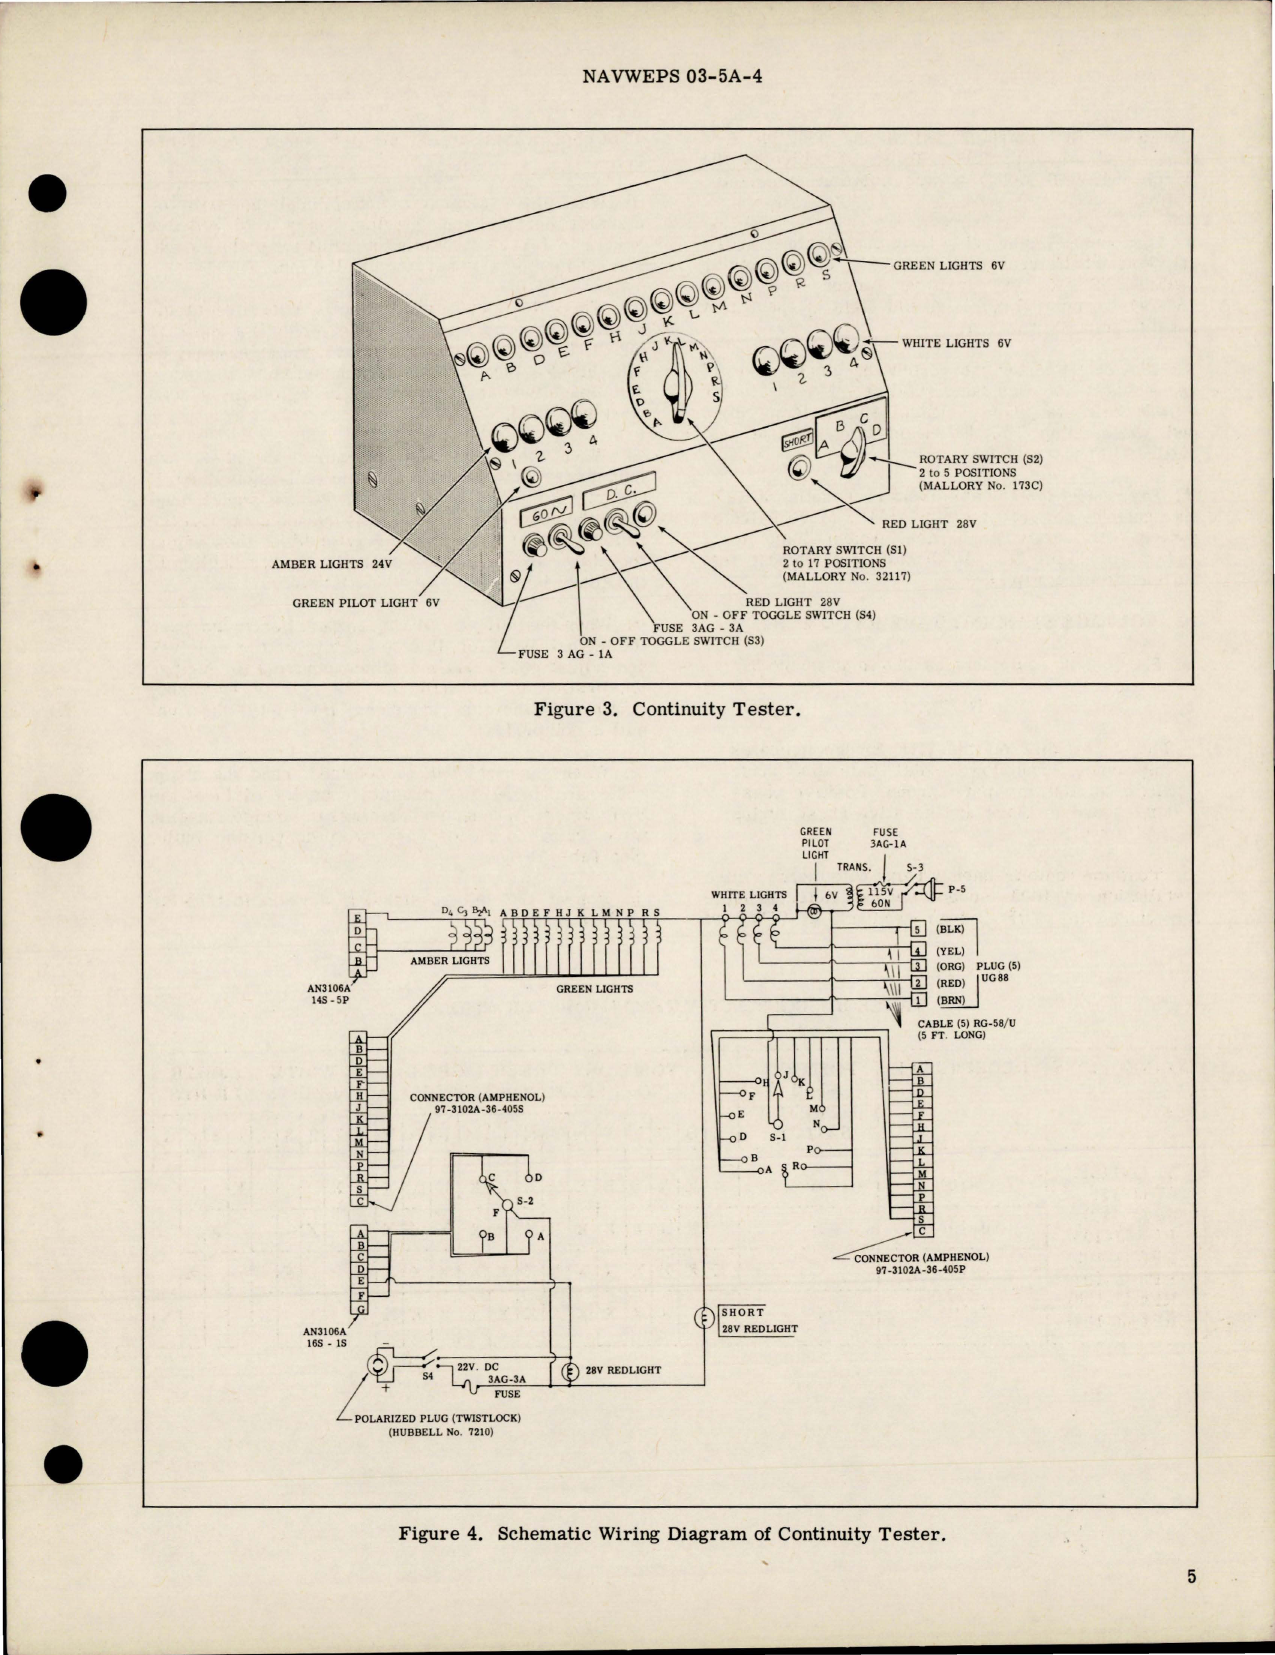 Sample page 7 from AirCorps Library document: Overhaul Instructions with Parts for Radio Frequency Relay with Power Switch - Model C4B4FB 